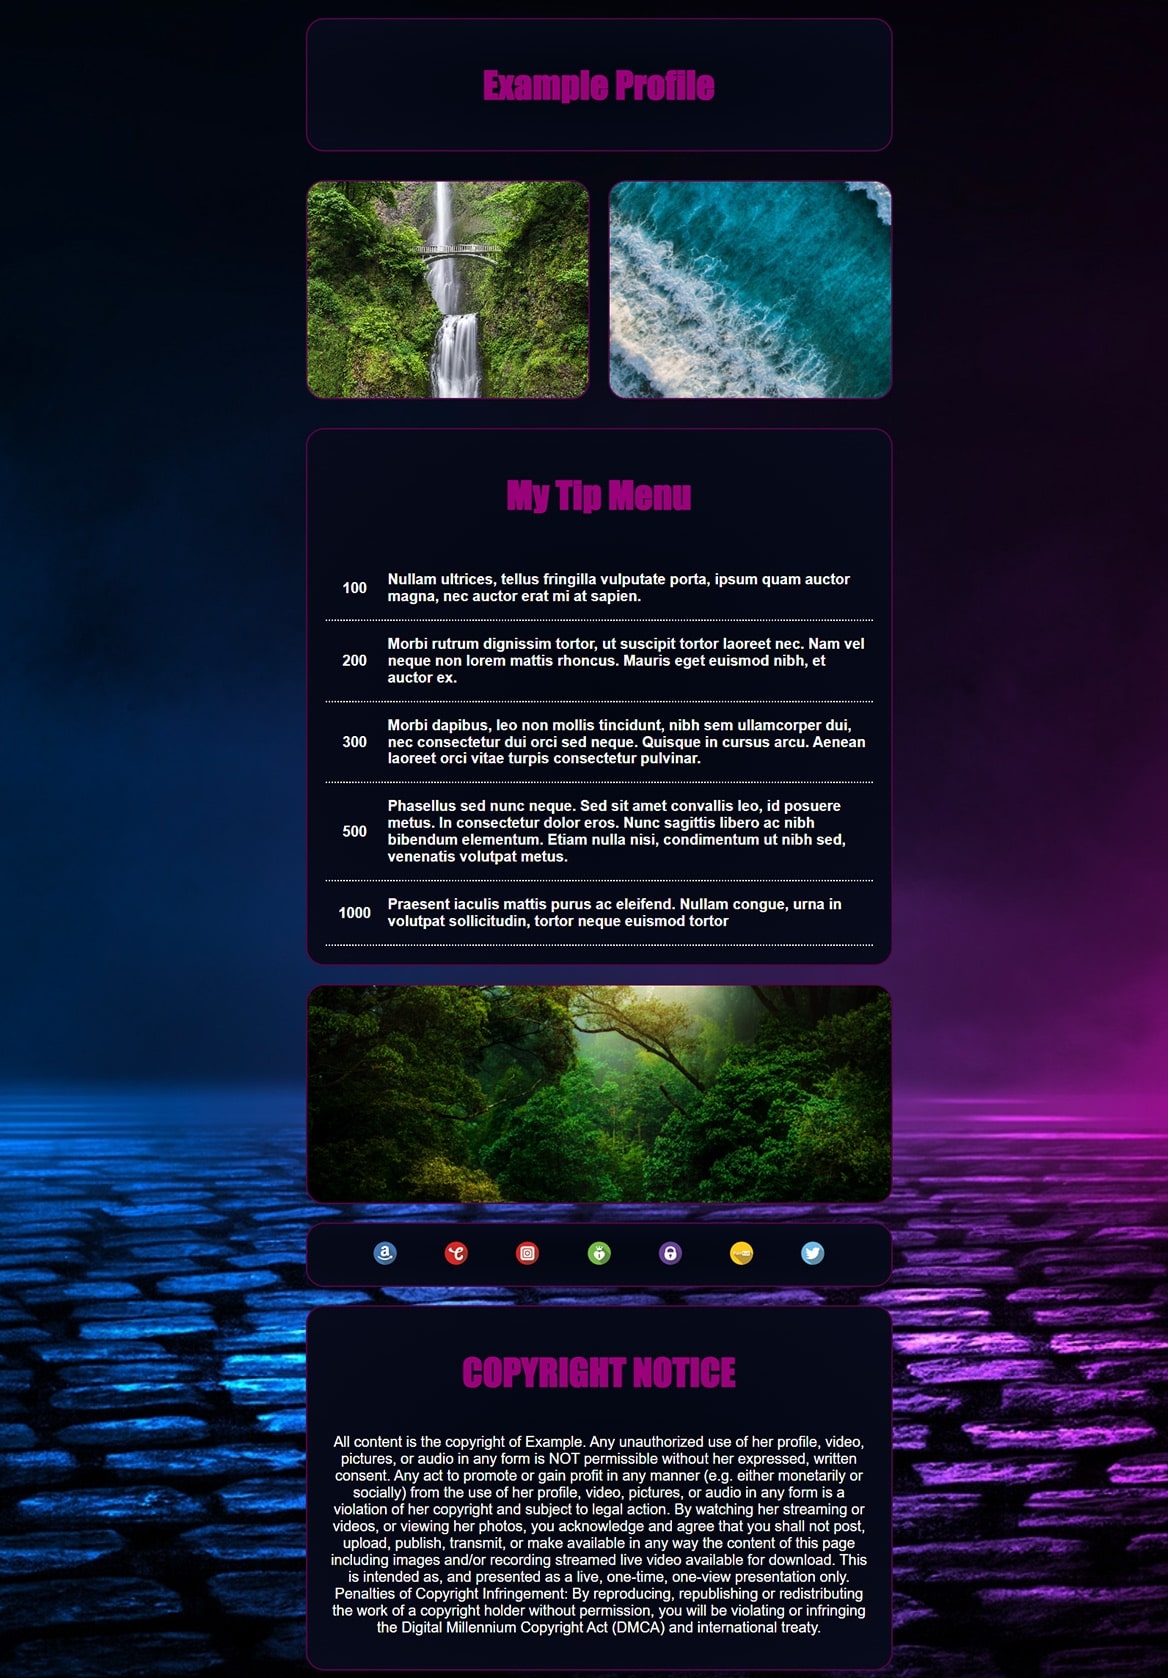 Dark Street theme with blue and purple background